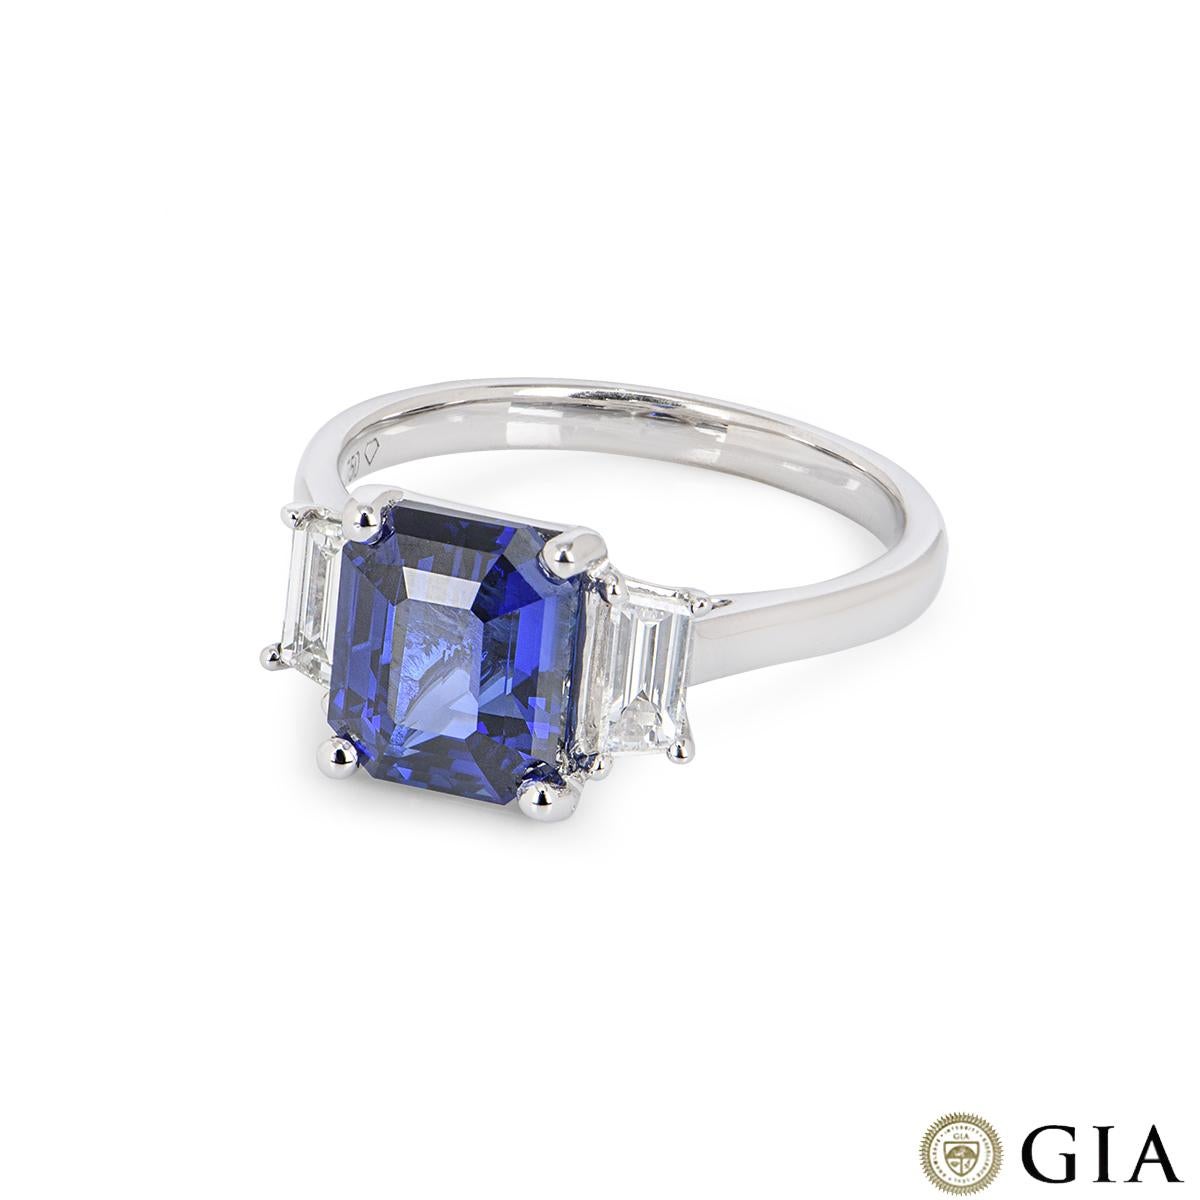 Octagon Cut GIA Certified Royal Blue Sapphire & Diamond Ring 3.04ct